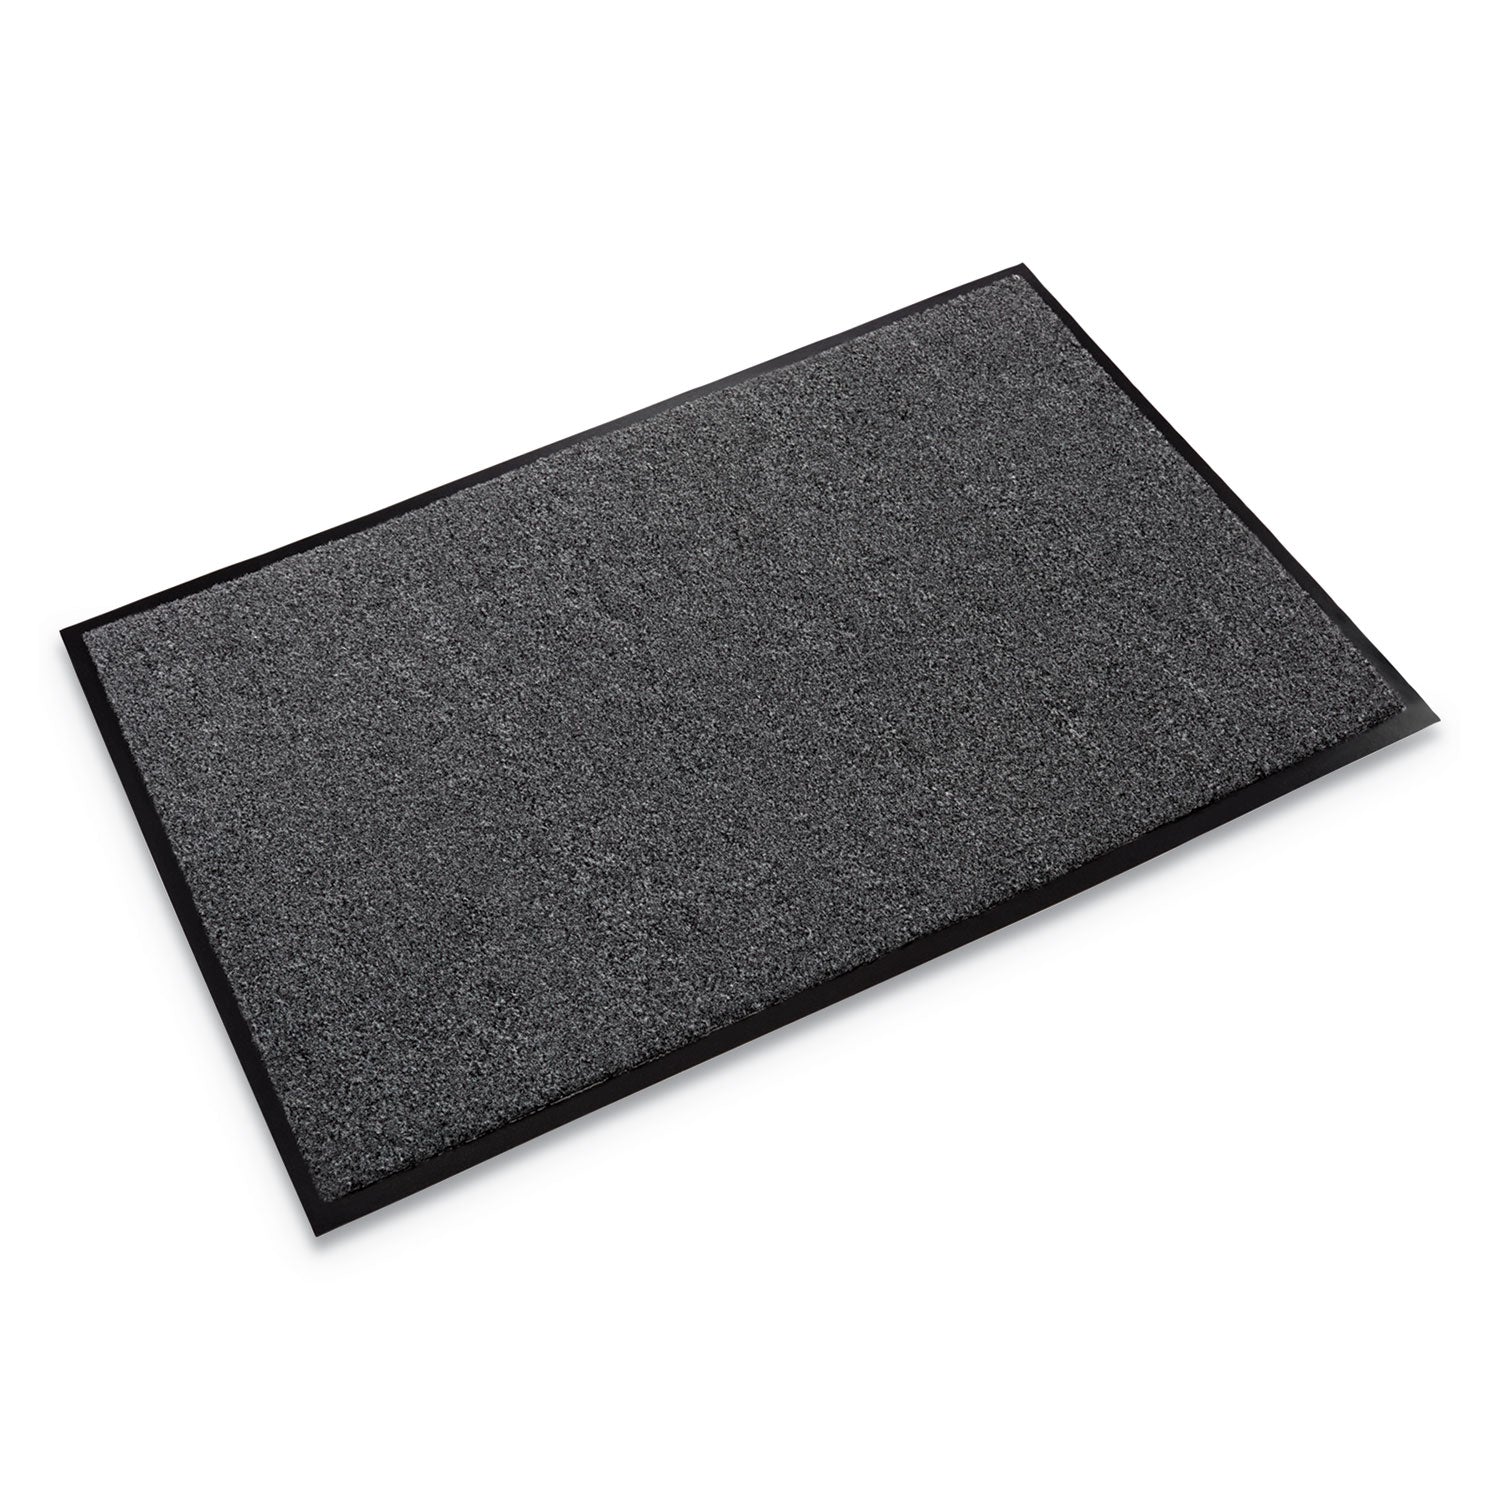 Rely-On Olefin Indoor Wiper Mat, 36 x 48, Charcoal - 1